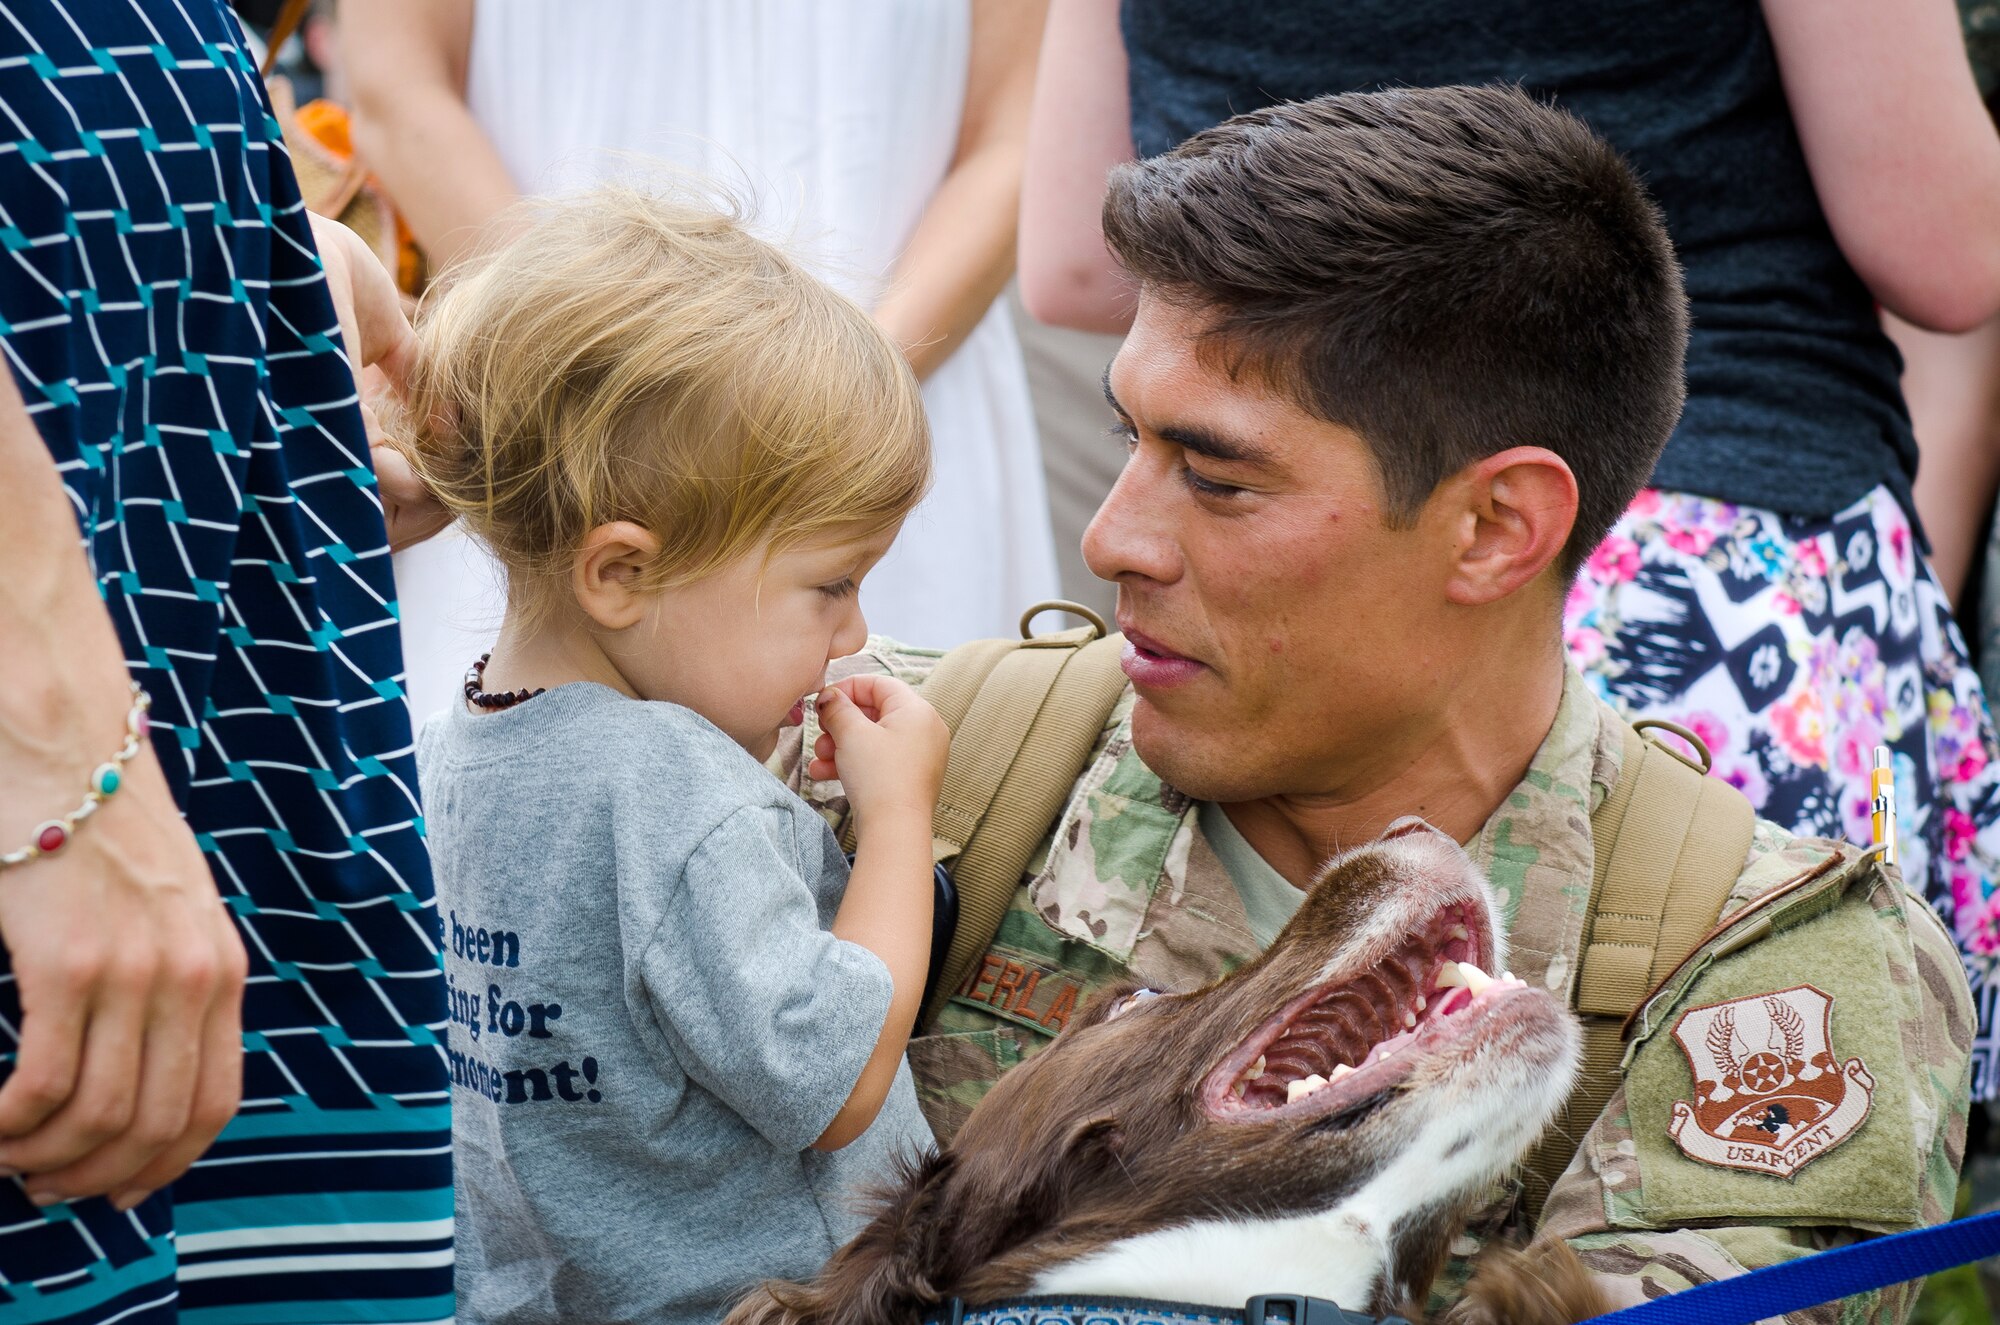 Capt. Trevor Sutherland, a pilot in the 165th Airlift Squadron, embraces his family during a homecoming ceremony at the Kentucky Air National Guard Base in Louisville, Ky., July 8, 2015. Sutherland and 29 other Kentucky Air Guardsmen returned from a deployment to the Persian Gulf Region, where they’ve been supporting Operation Freedom’s Sentinel since February. (U.S. Air National Guard photo by Master Sgt. Phil Speck)